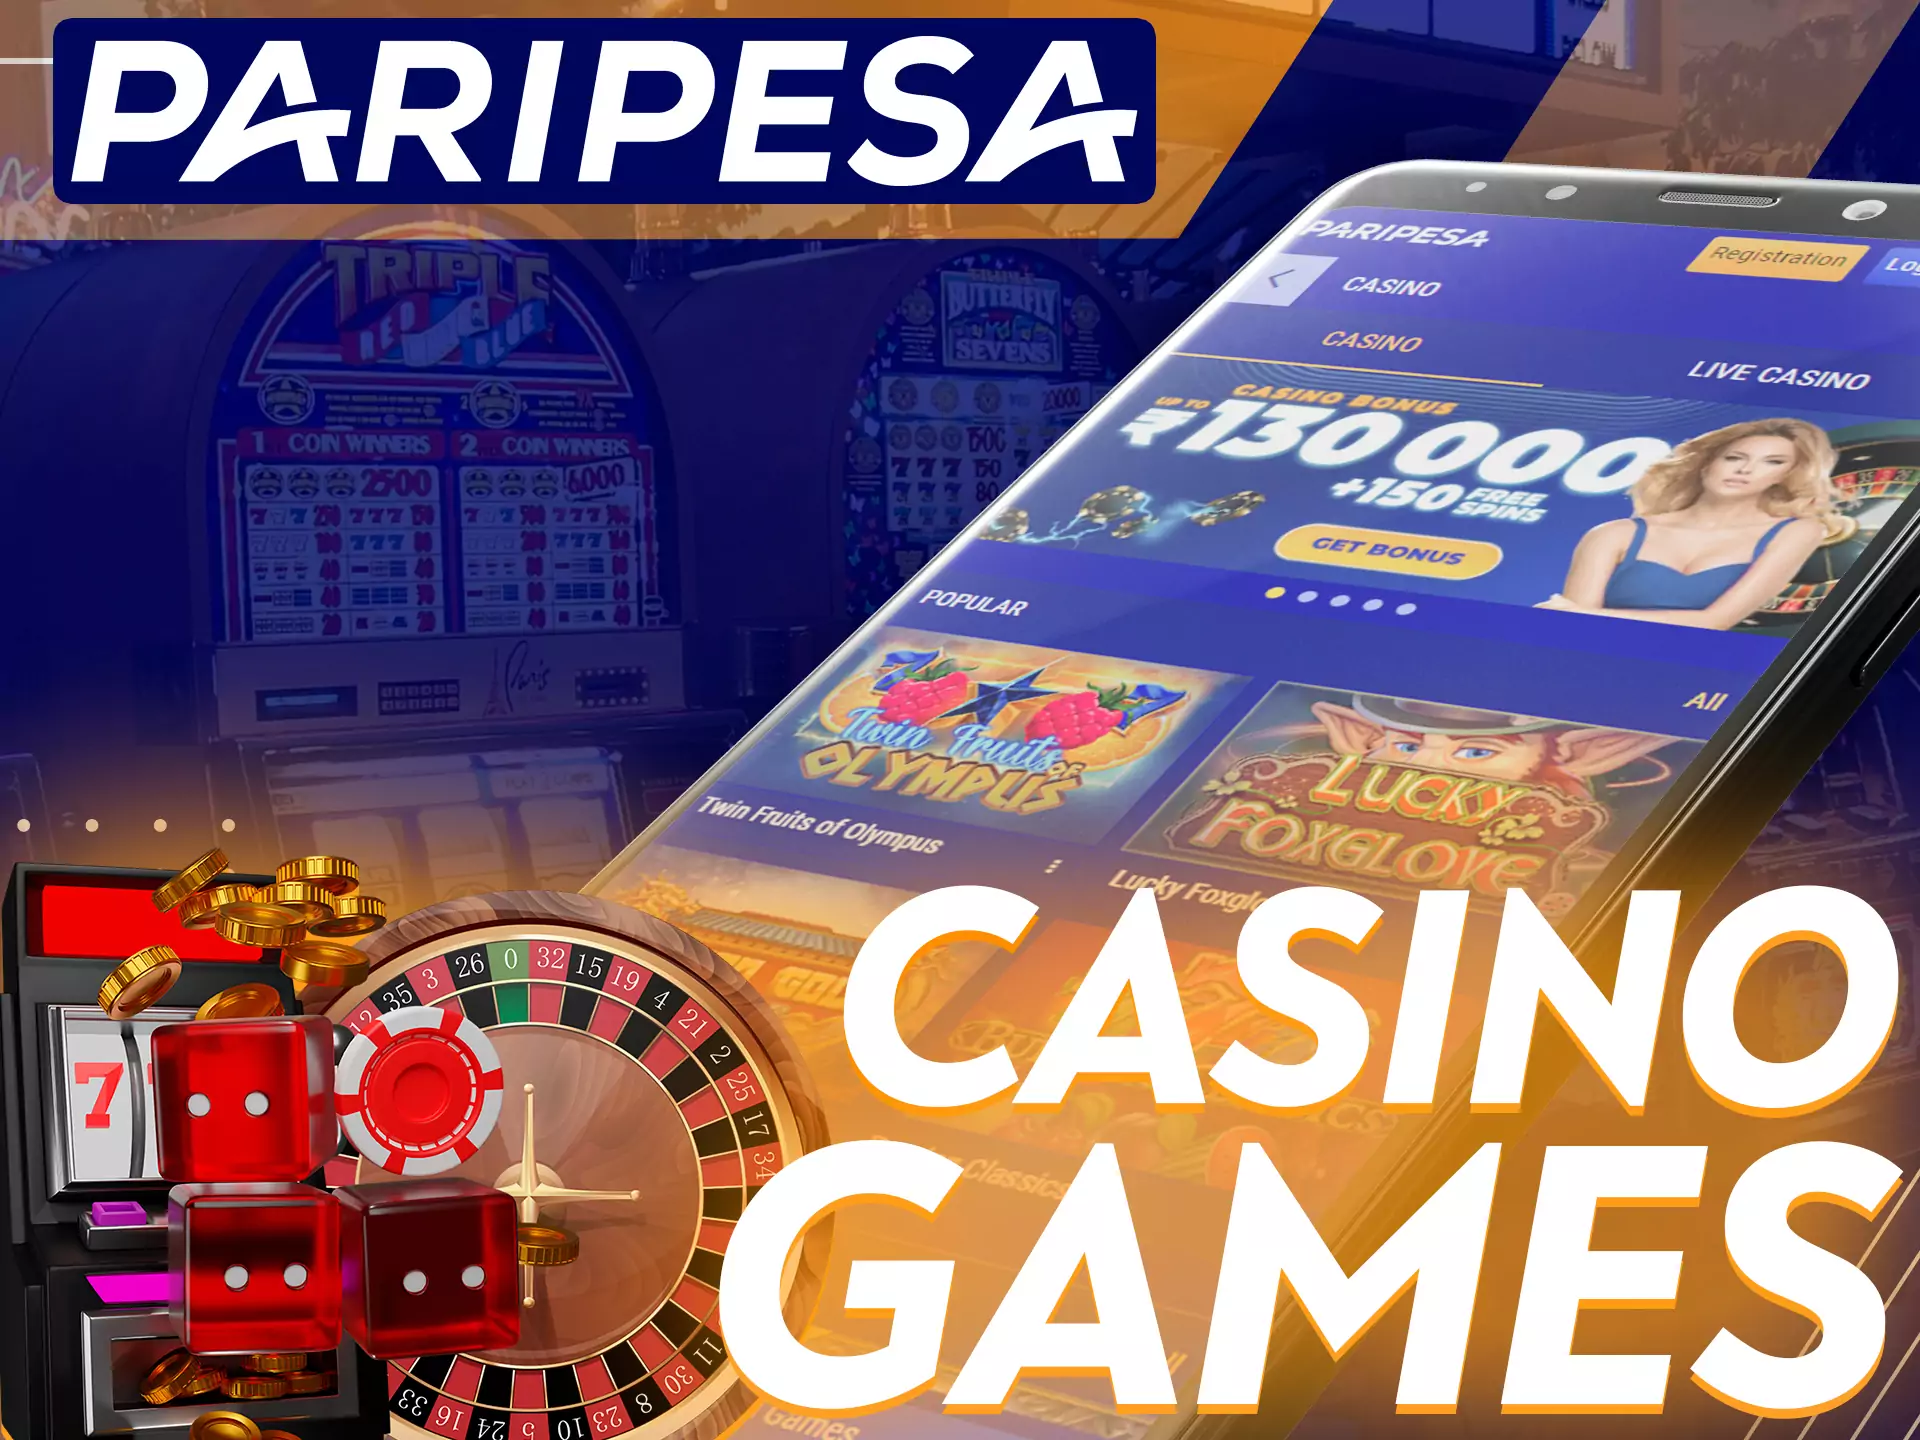 On the Paripesa app, try different casino games.